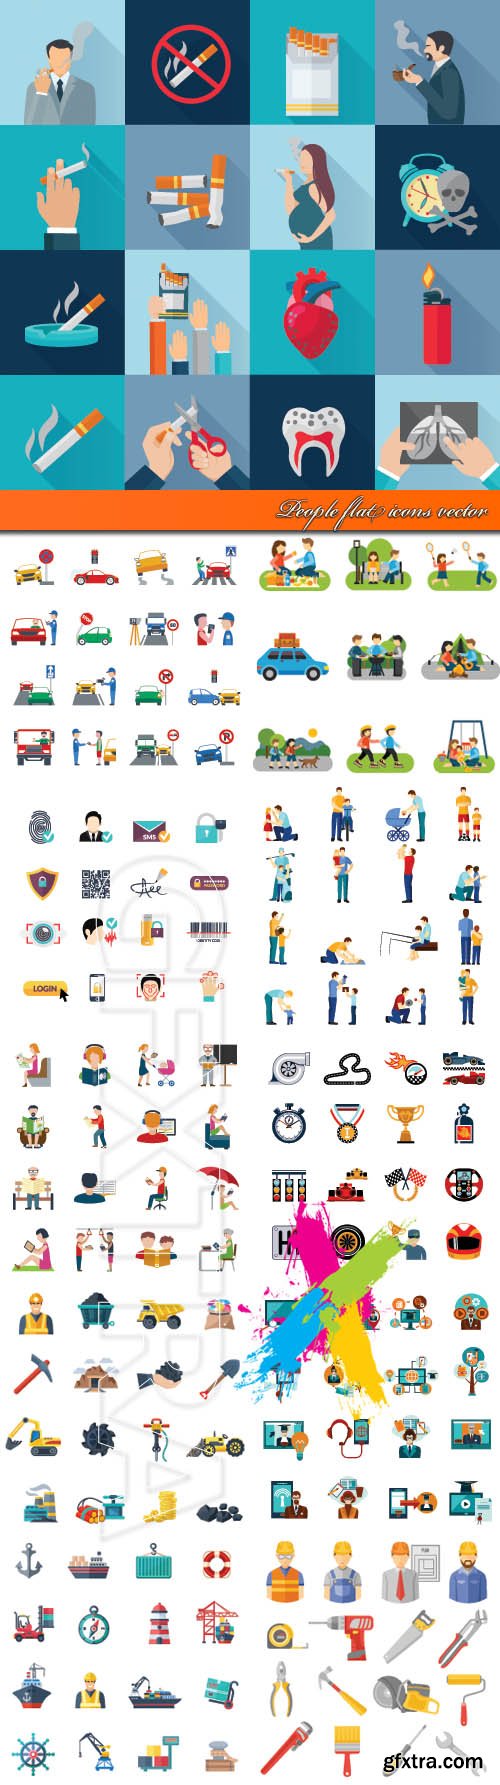 People flat icons vector